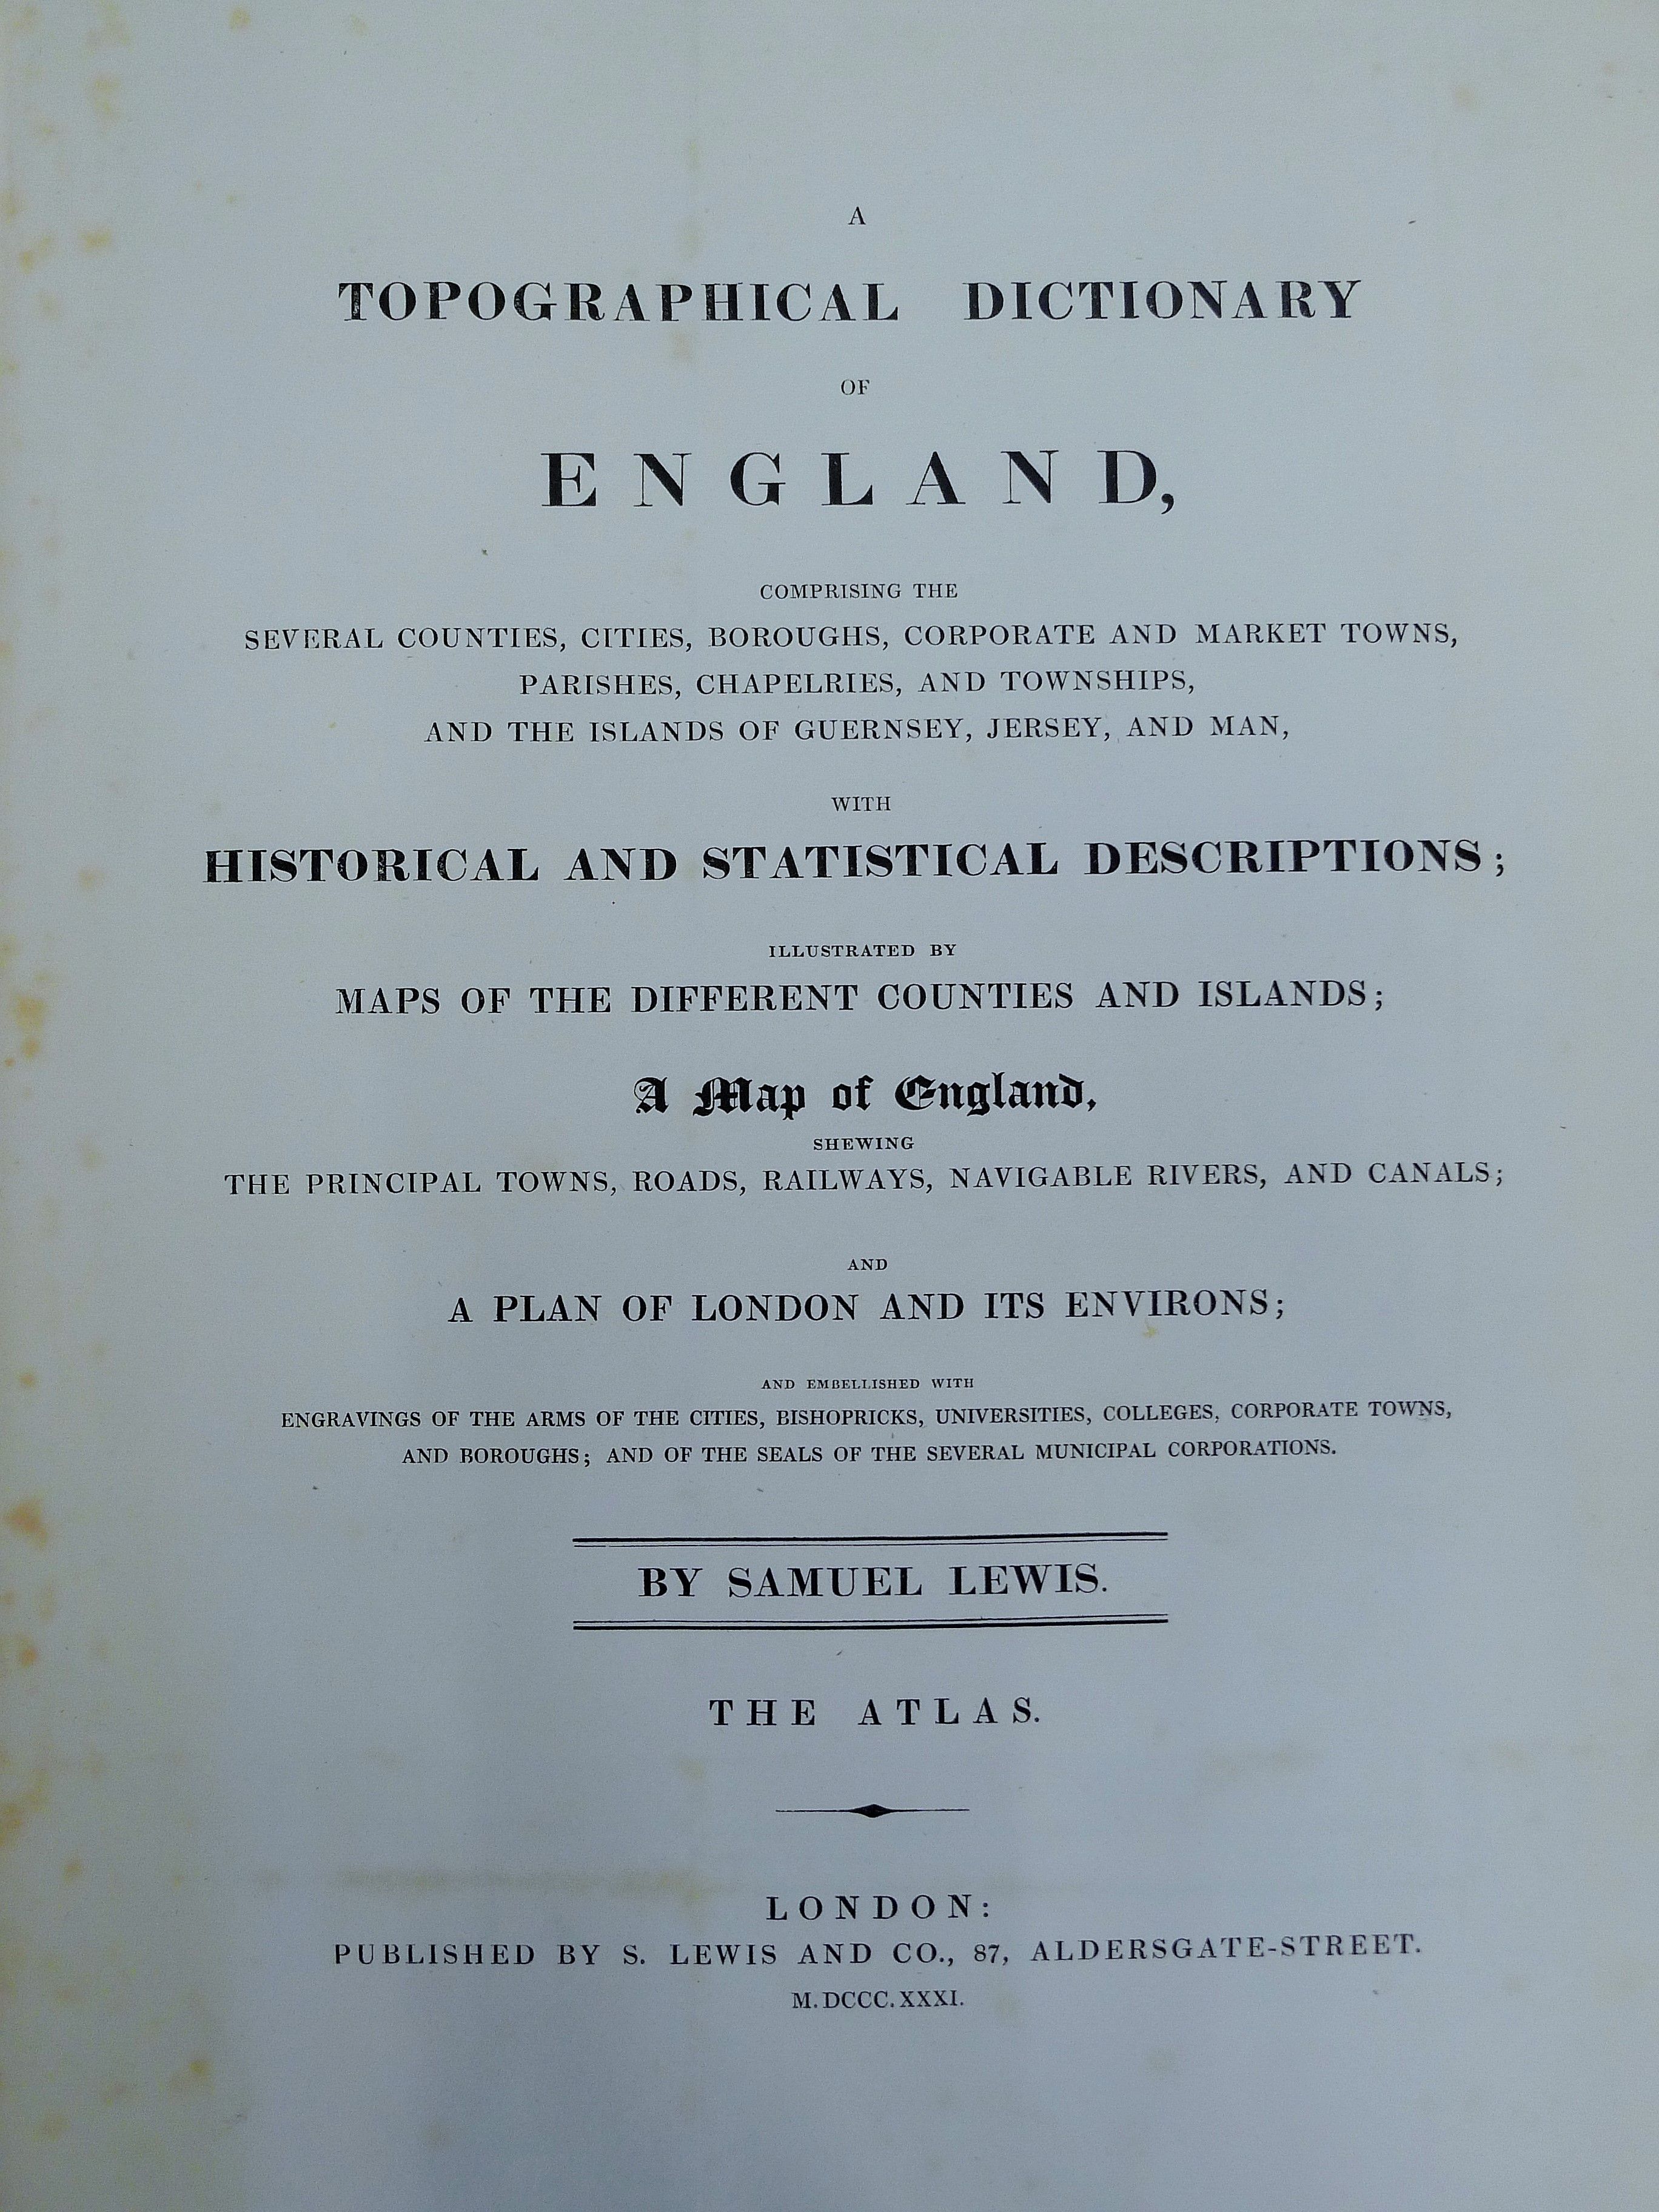 Lewis (Samuel), A Topographical Dictionary of England, 4 volumes and atlas volume, - Image 8 of 11